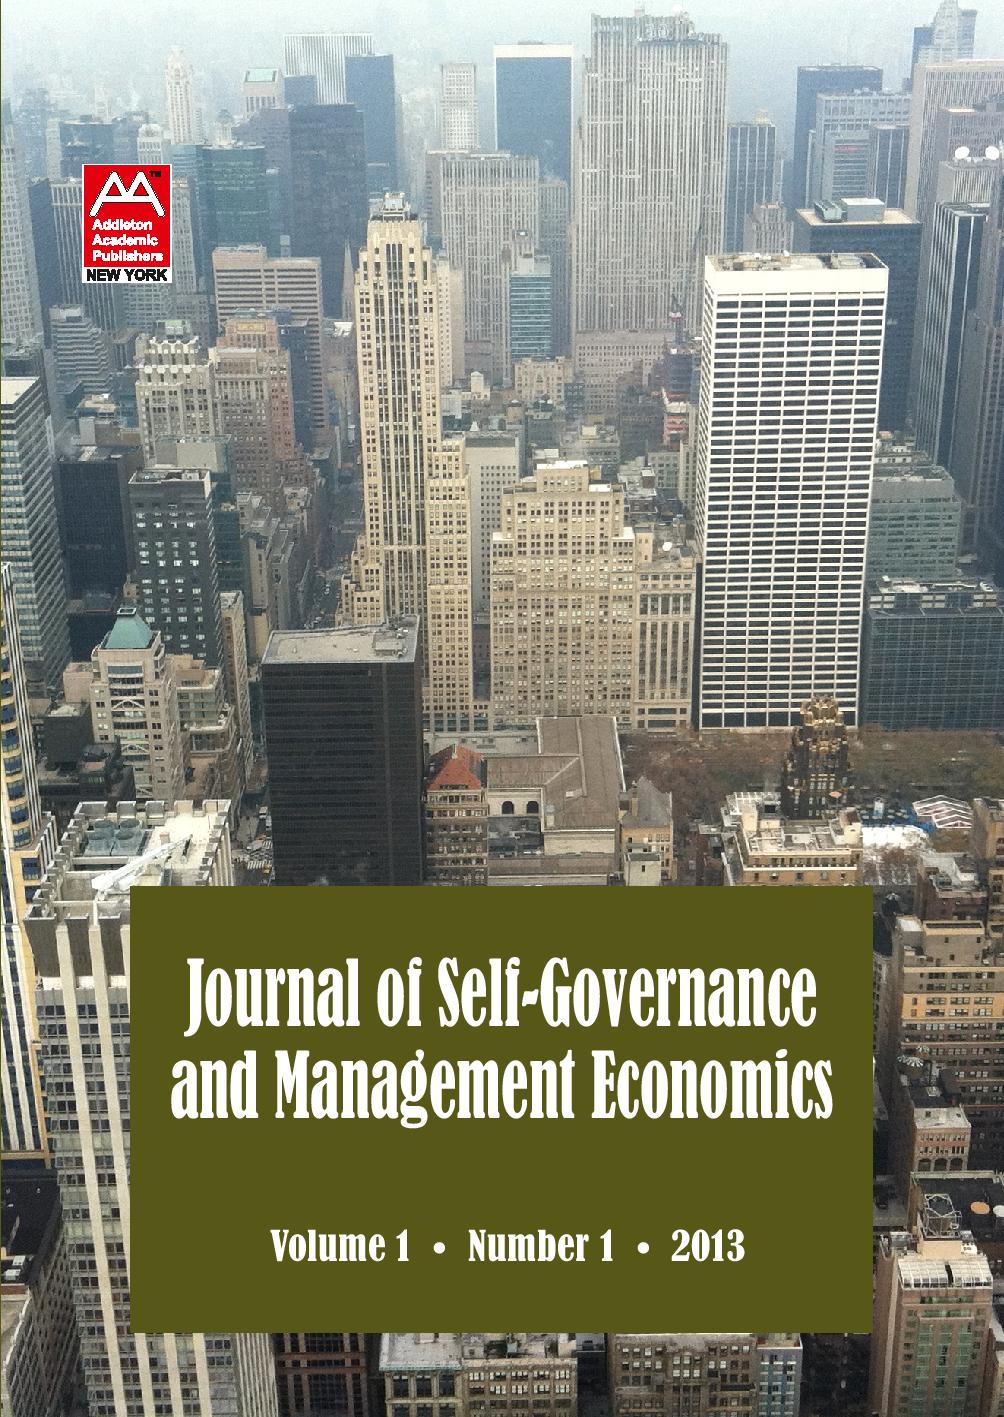 BUSINESS ETHICS, CORPORATE GOVERNANCE, AND SOCIAL RESPONSIBILITY Cover Image